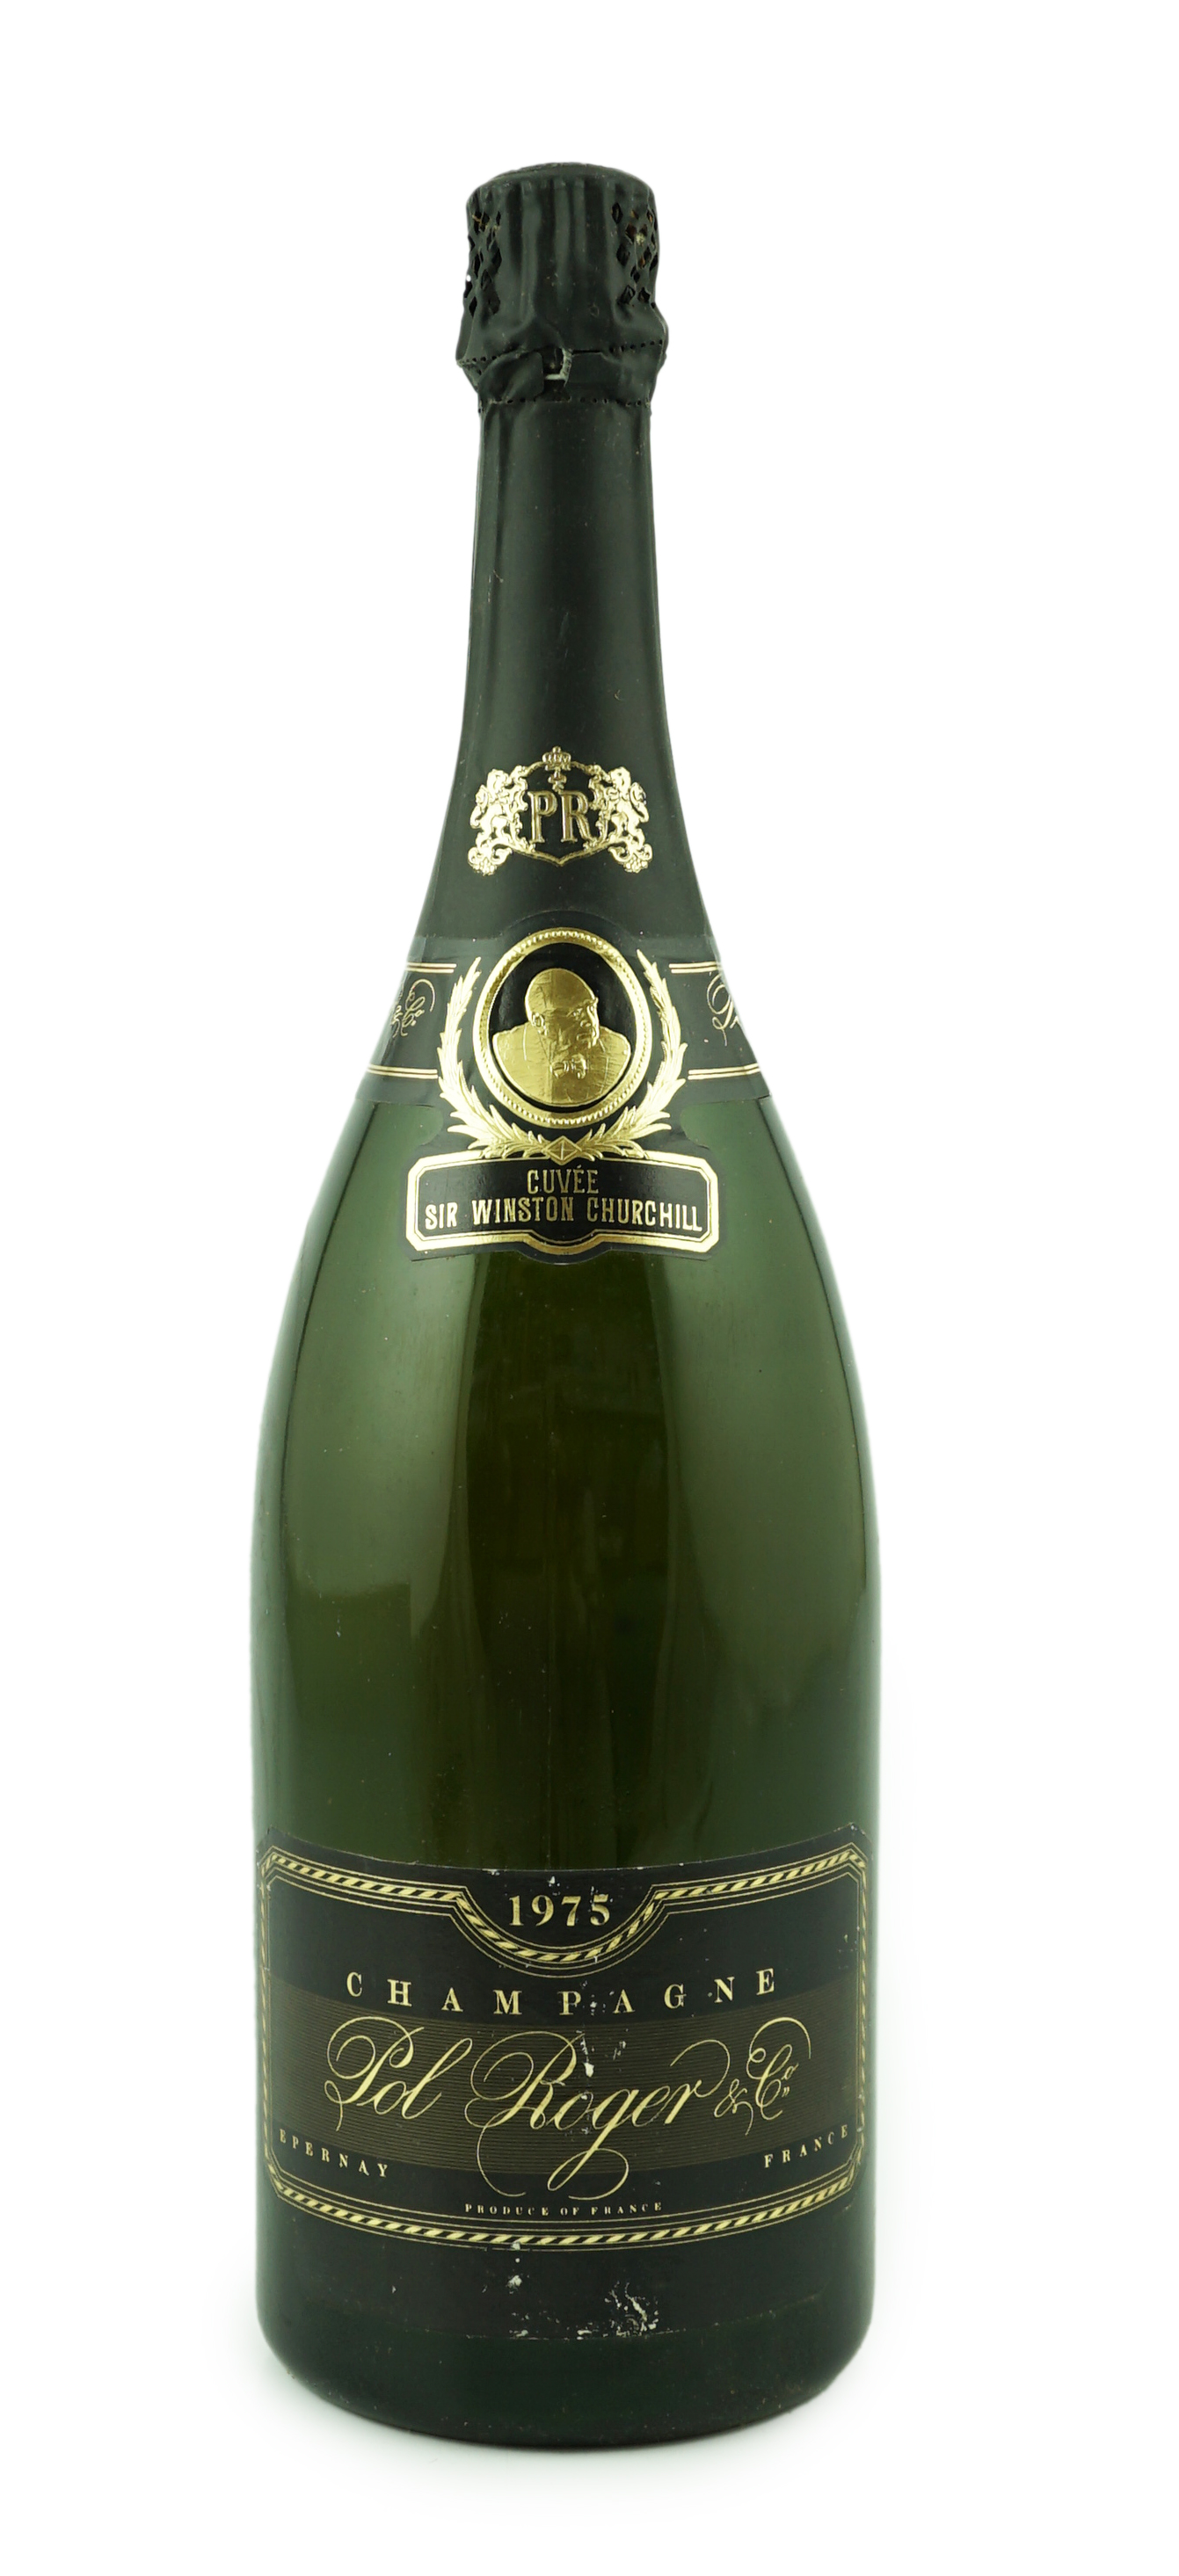 A magnum of champagne Pol Roger Cuvée Sir Winston Churchill 1975                                                                                                                                                            